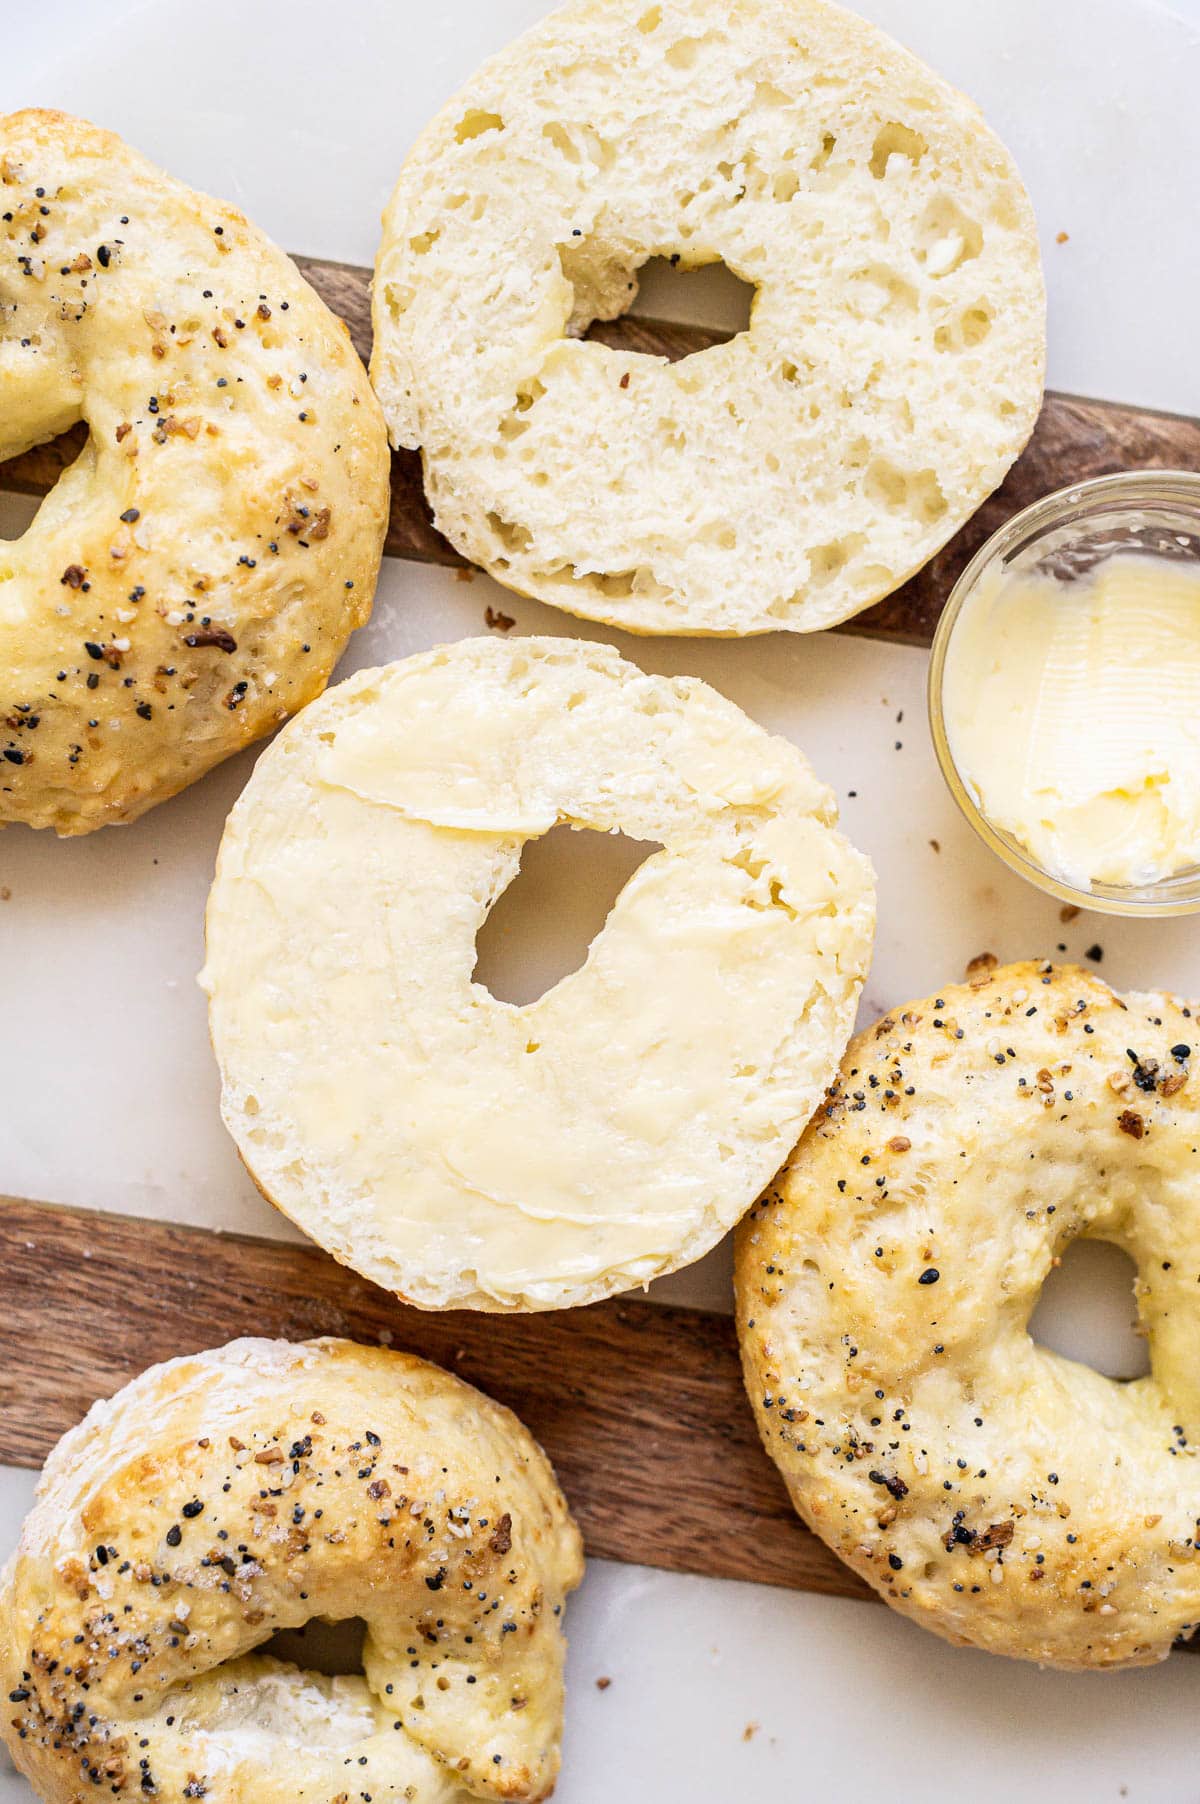 Sliced bagel with cottage cheese and smeared with butter. More protein bagels around.